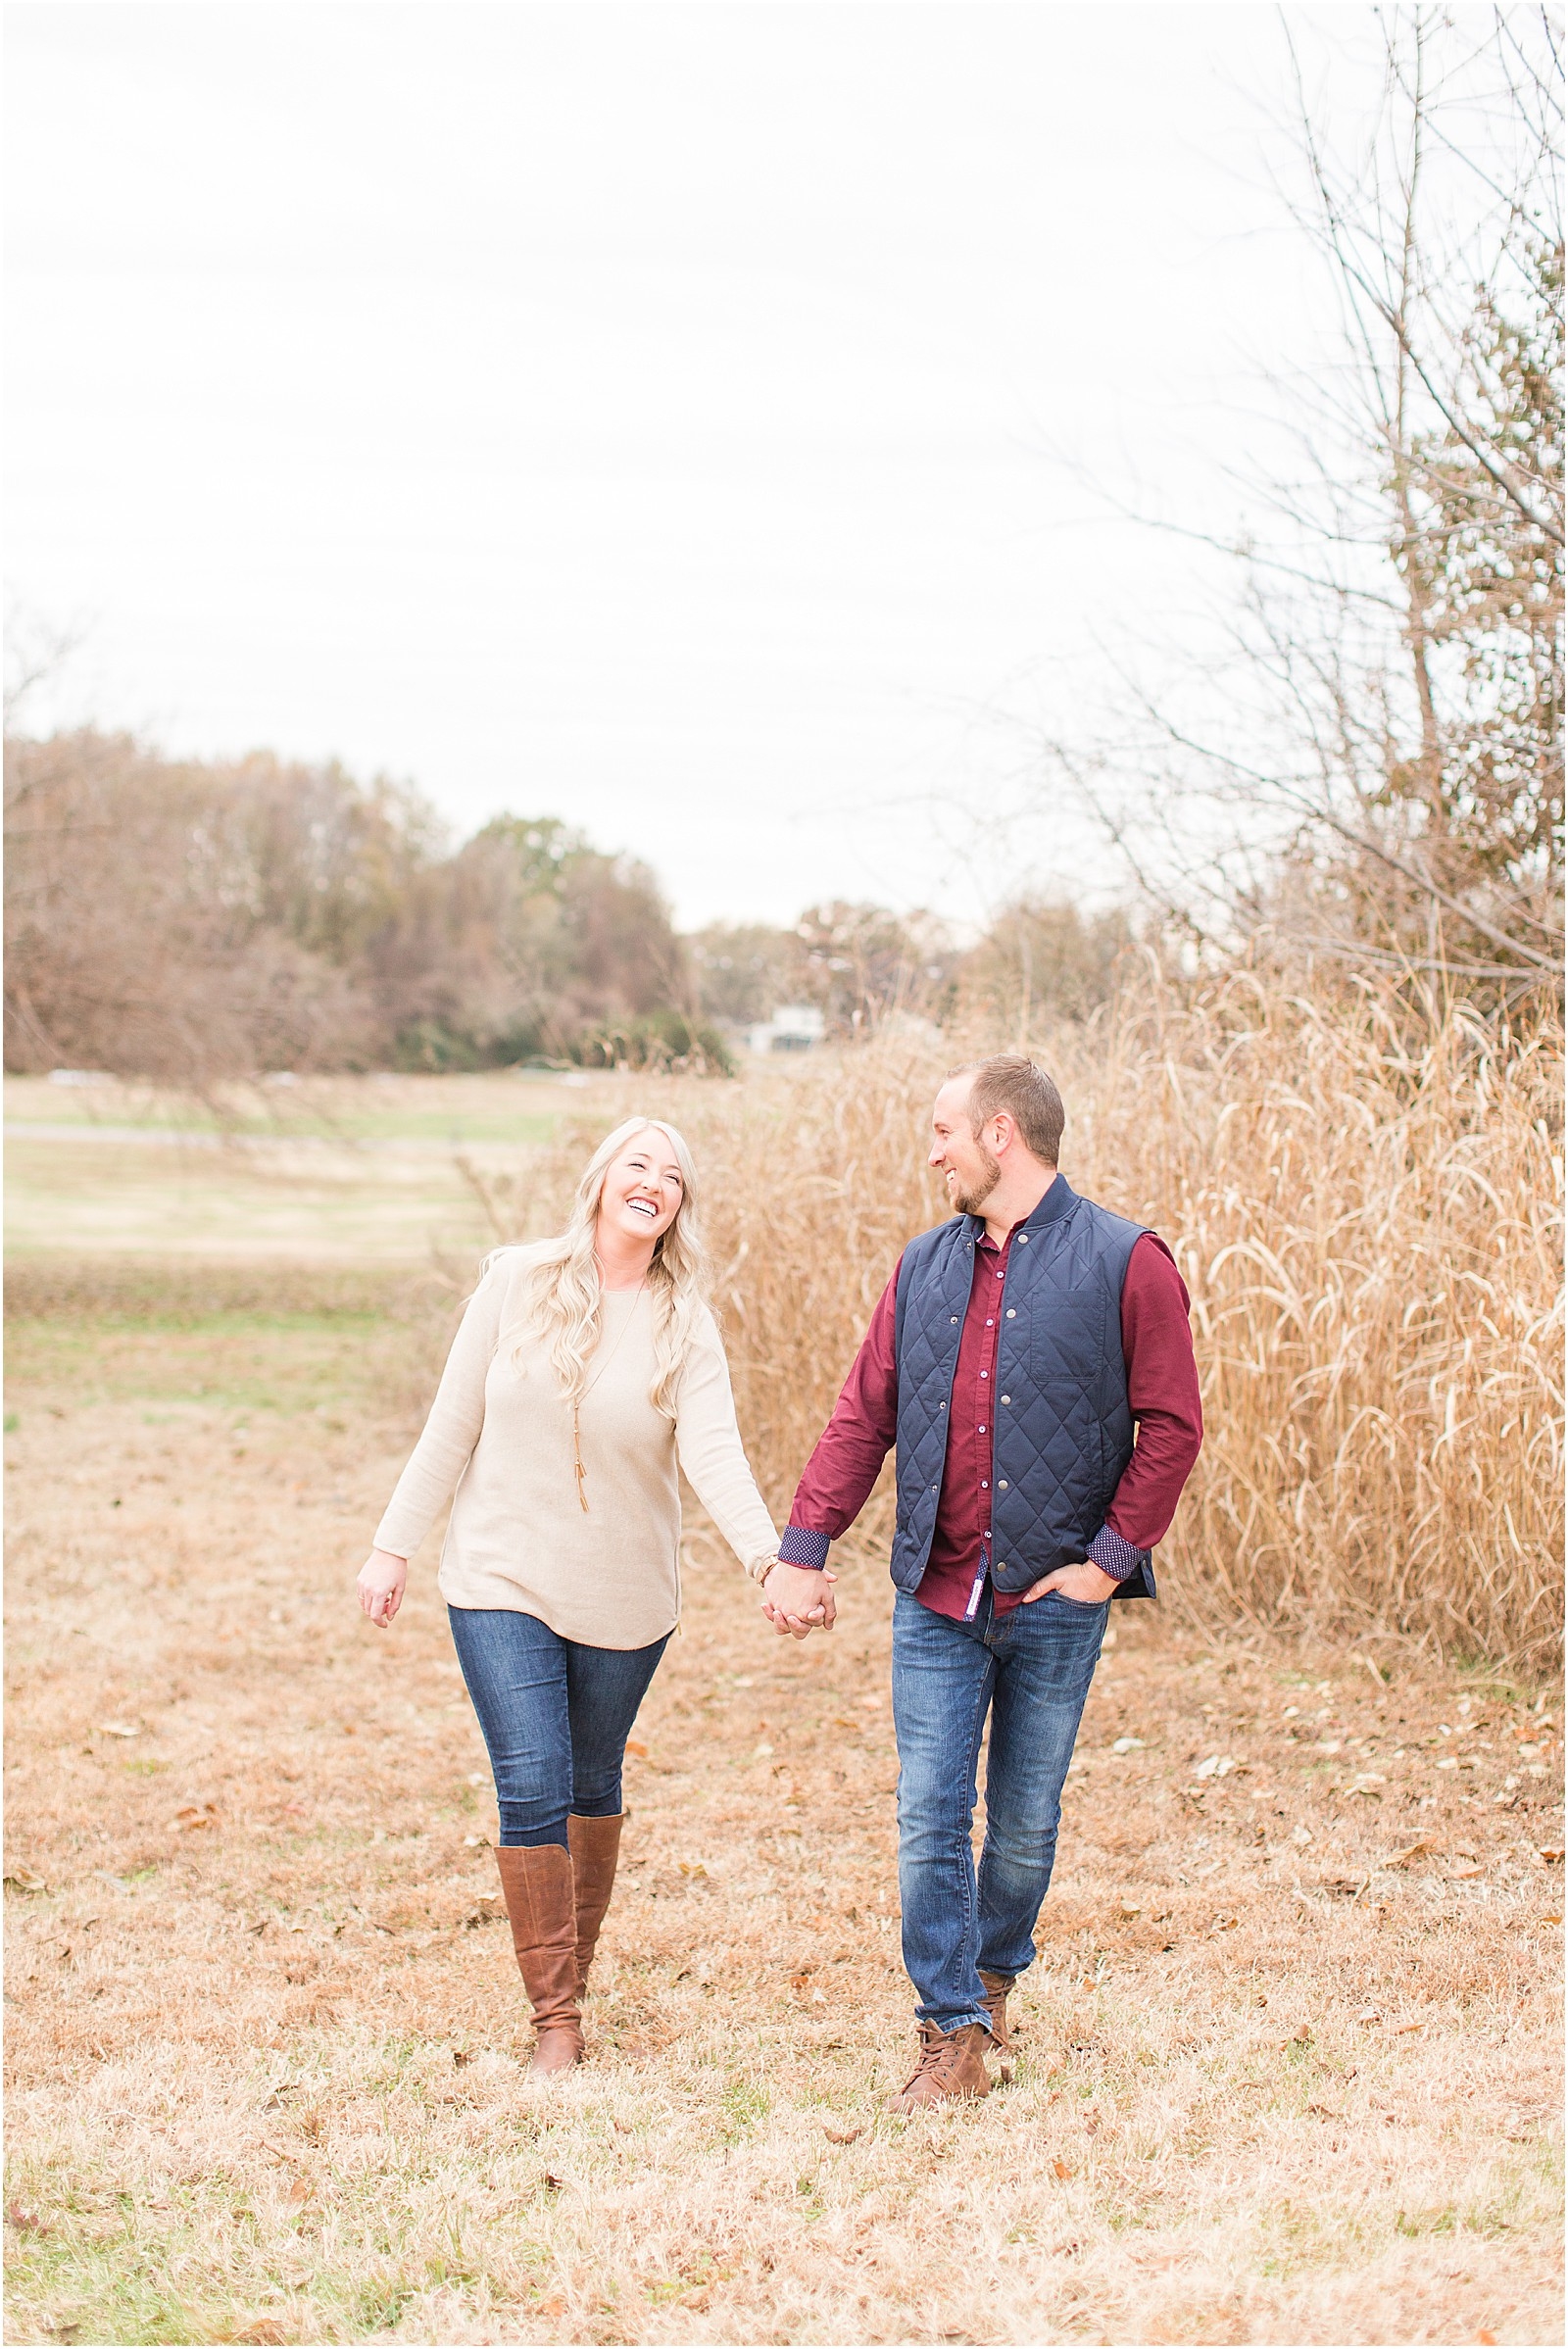 A Perfect Fall Engagement Session at Evansville State Park | Jamie and Max | Bret and Brandie Photography 014.jpg